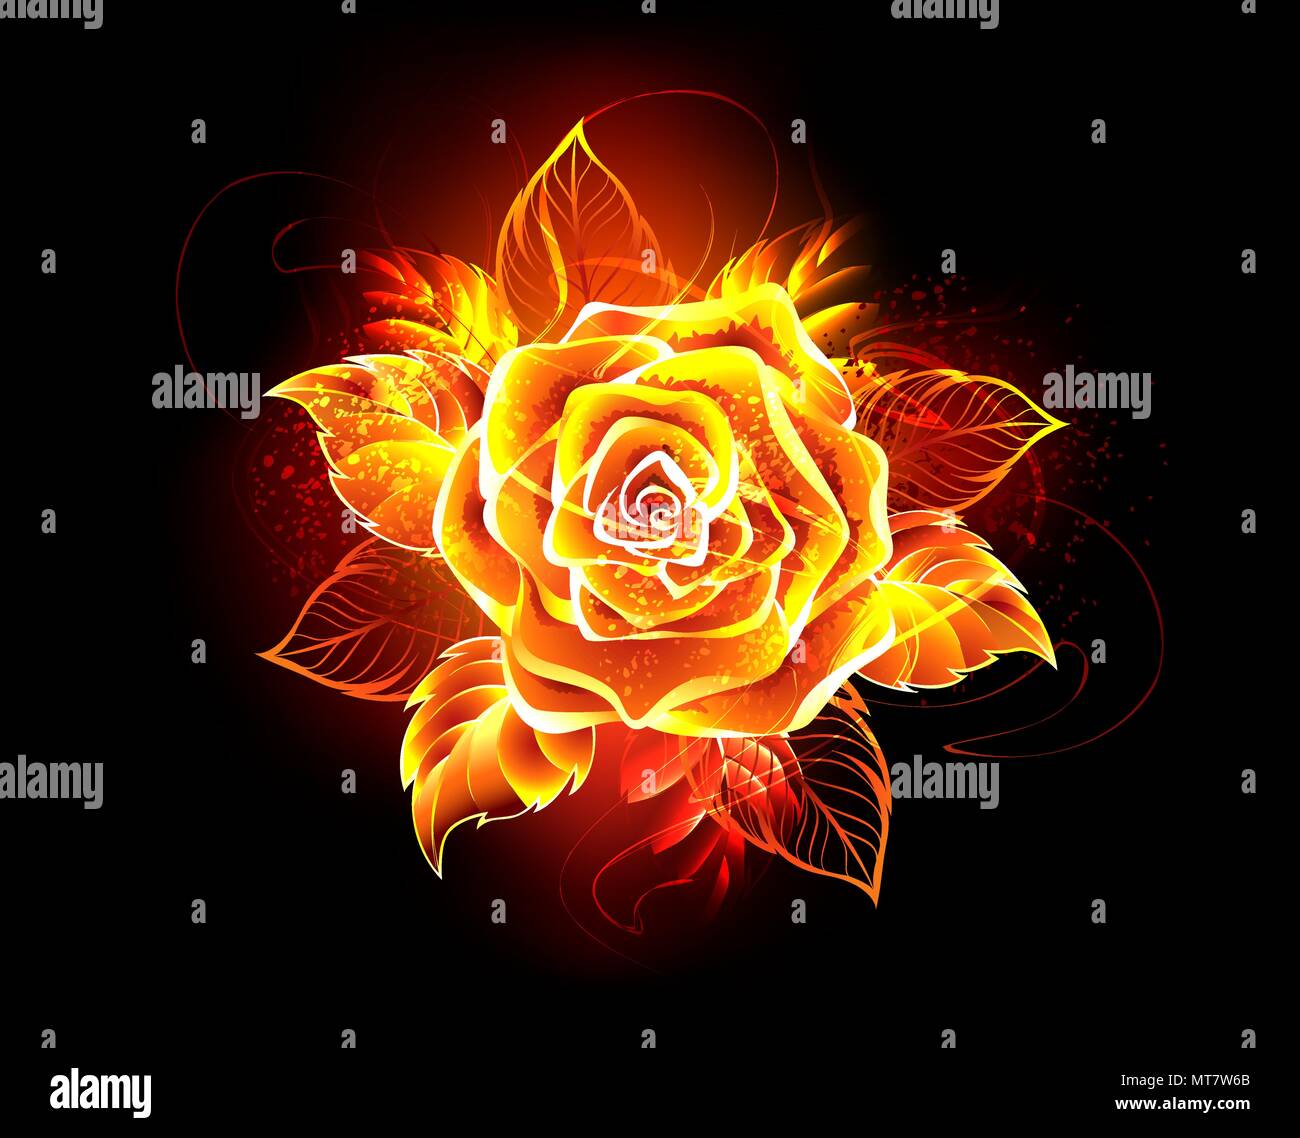 Blooming rose from fire and flame on black background. Stock Vector